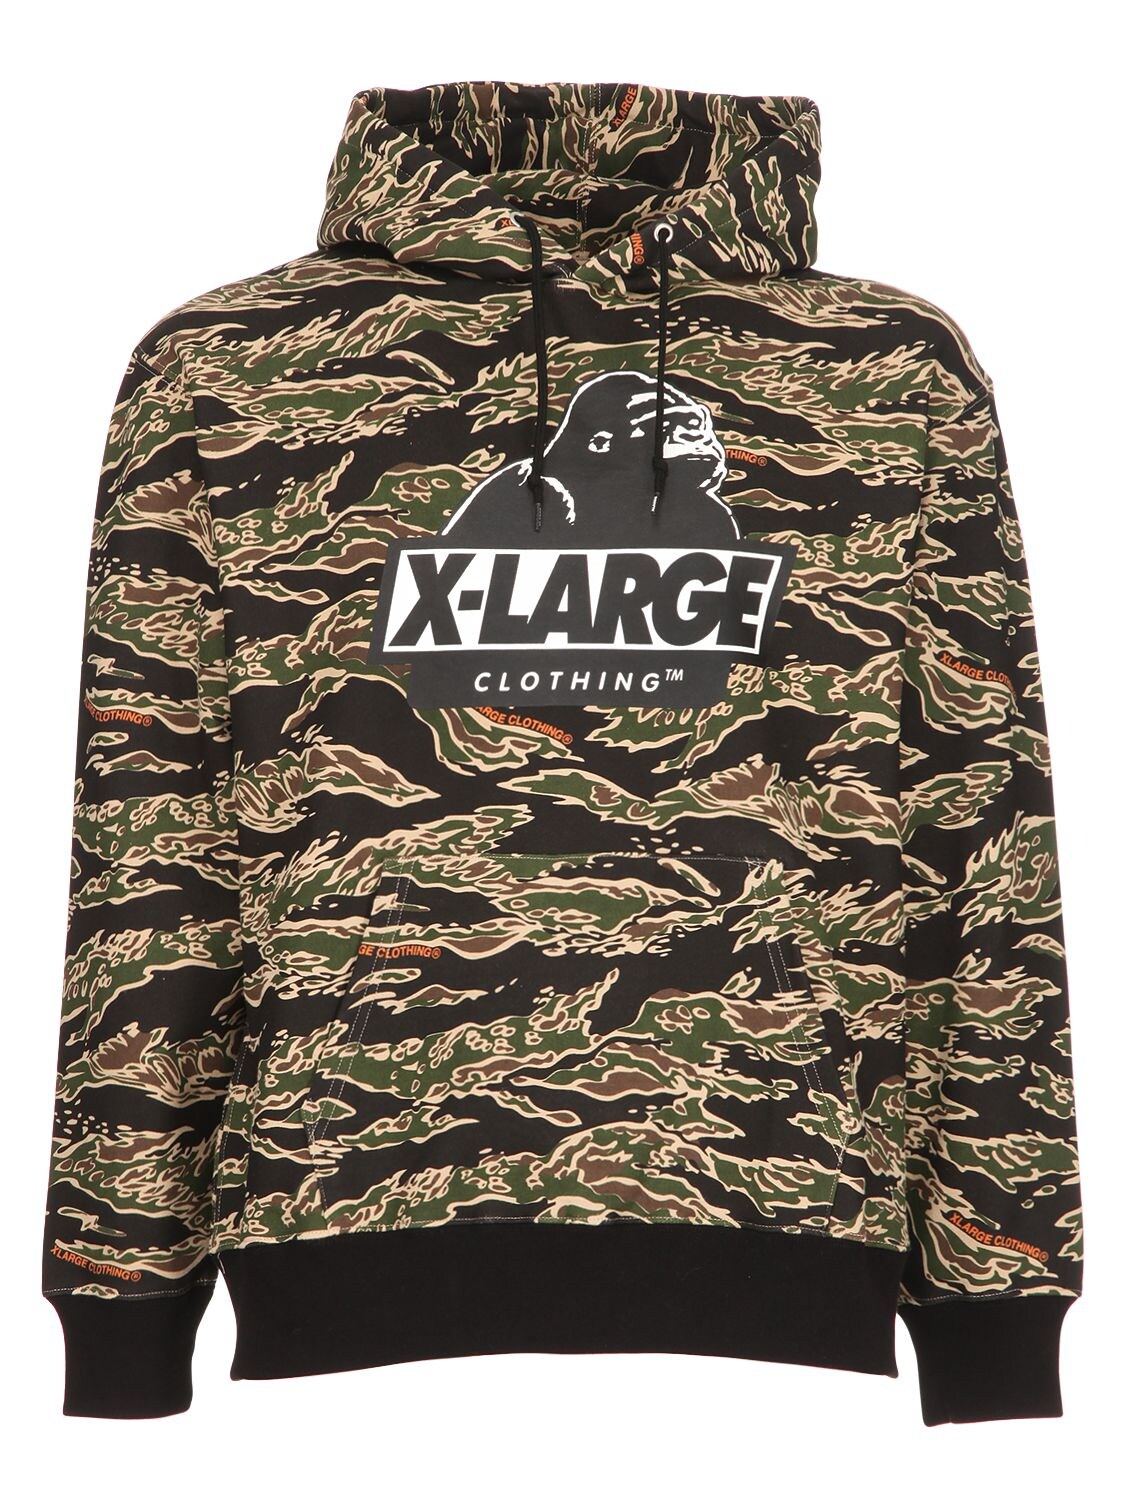 X-large Tiger Camo Og Hooded Cotton Sweatshirt In Camouflage